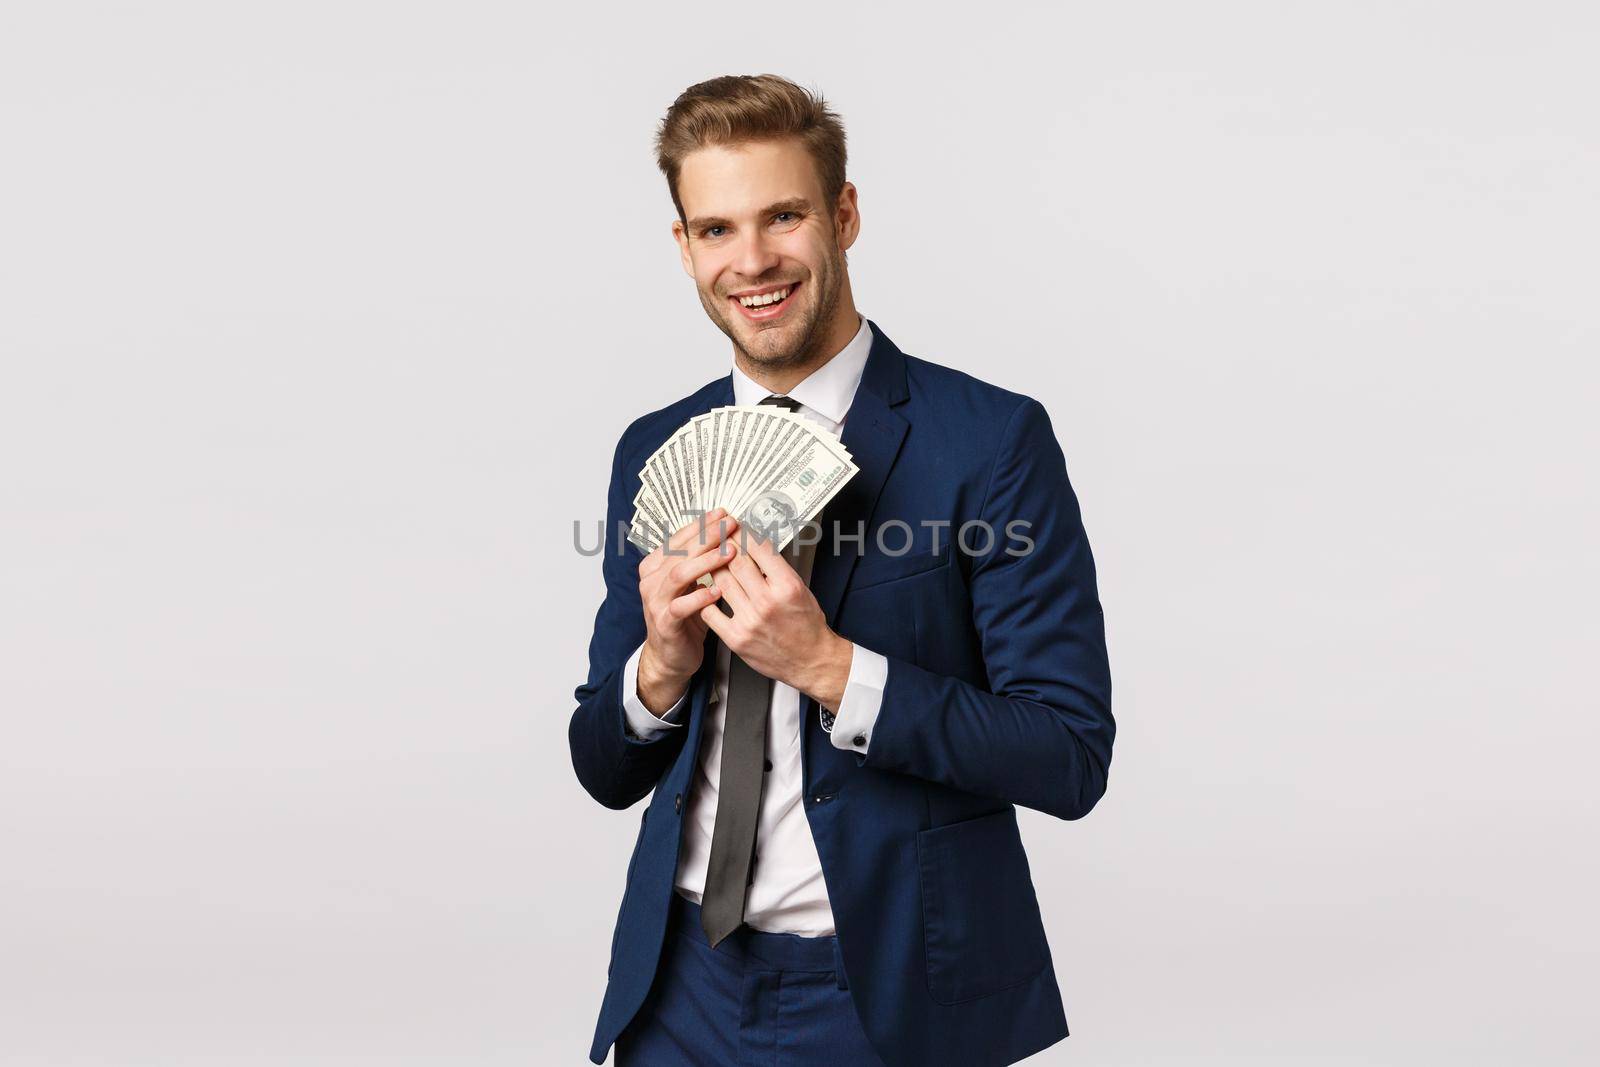 Business, finance and money concept. Cheerful, pleased handsome blond bearded businessman in classic suit, tie, holding lots cash, winning bid, smiling pleased, standing white background.